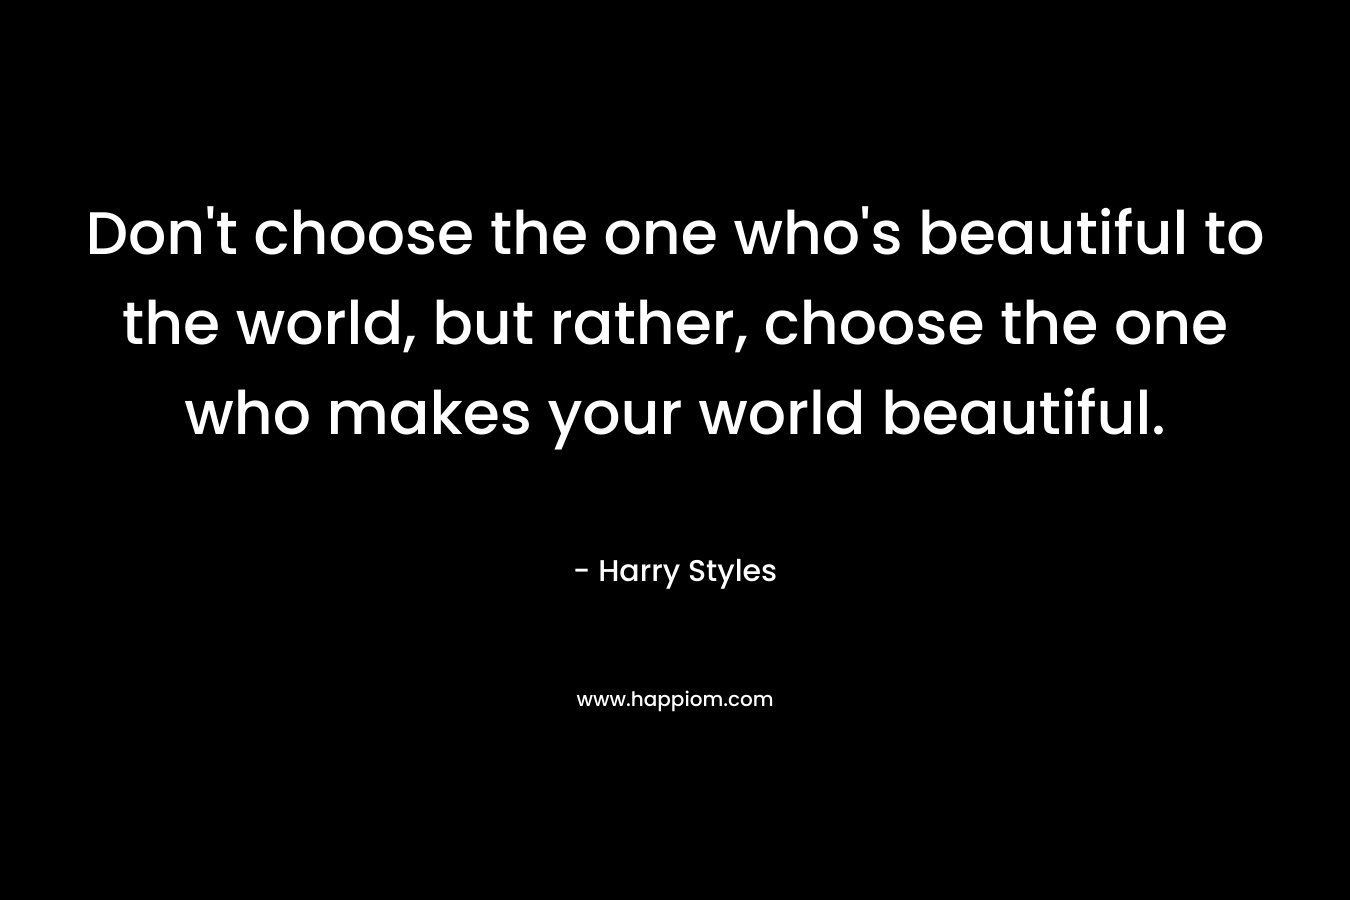 Don't choose the one who's beautiful to the world, but rather, choose the one who makes your world beautiful.